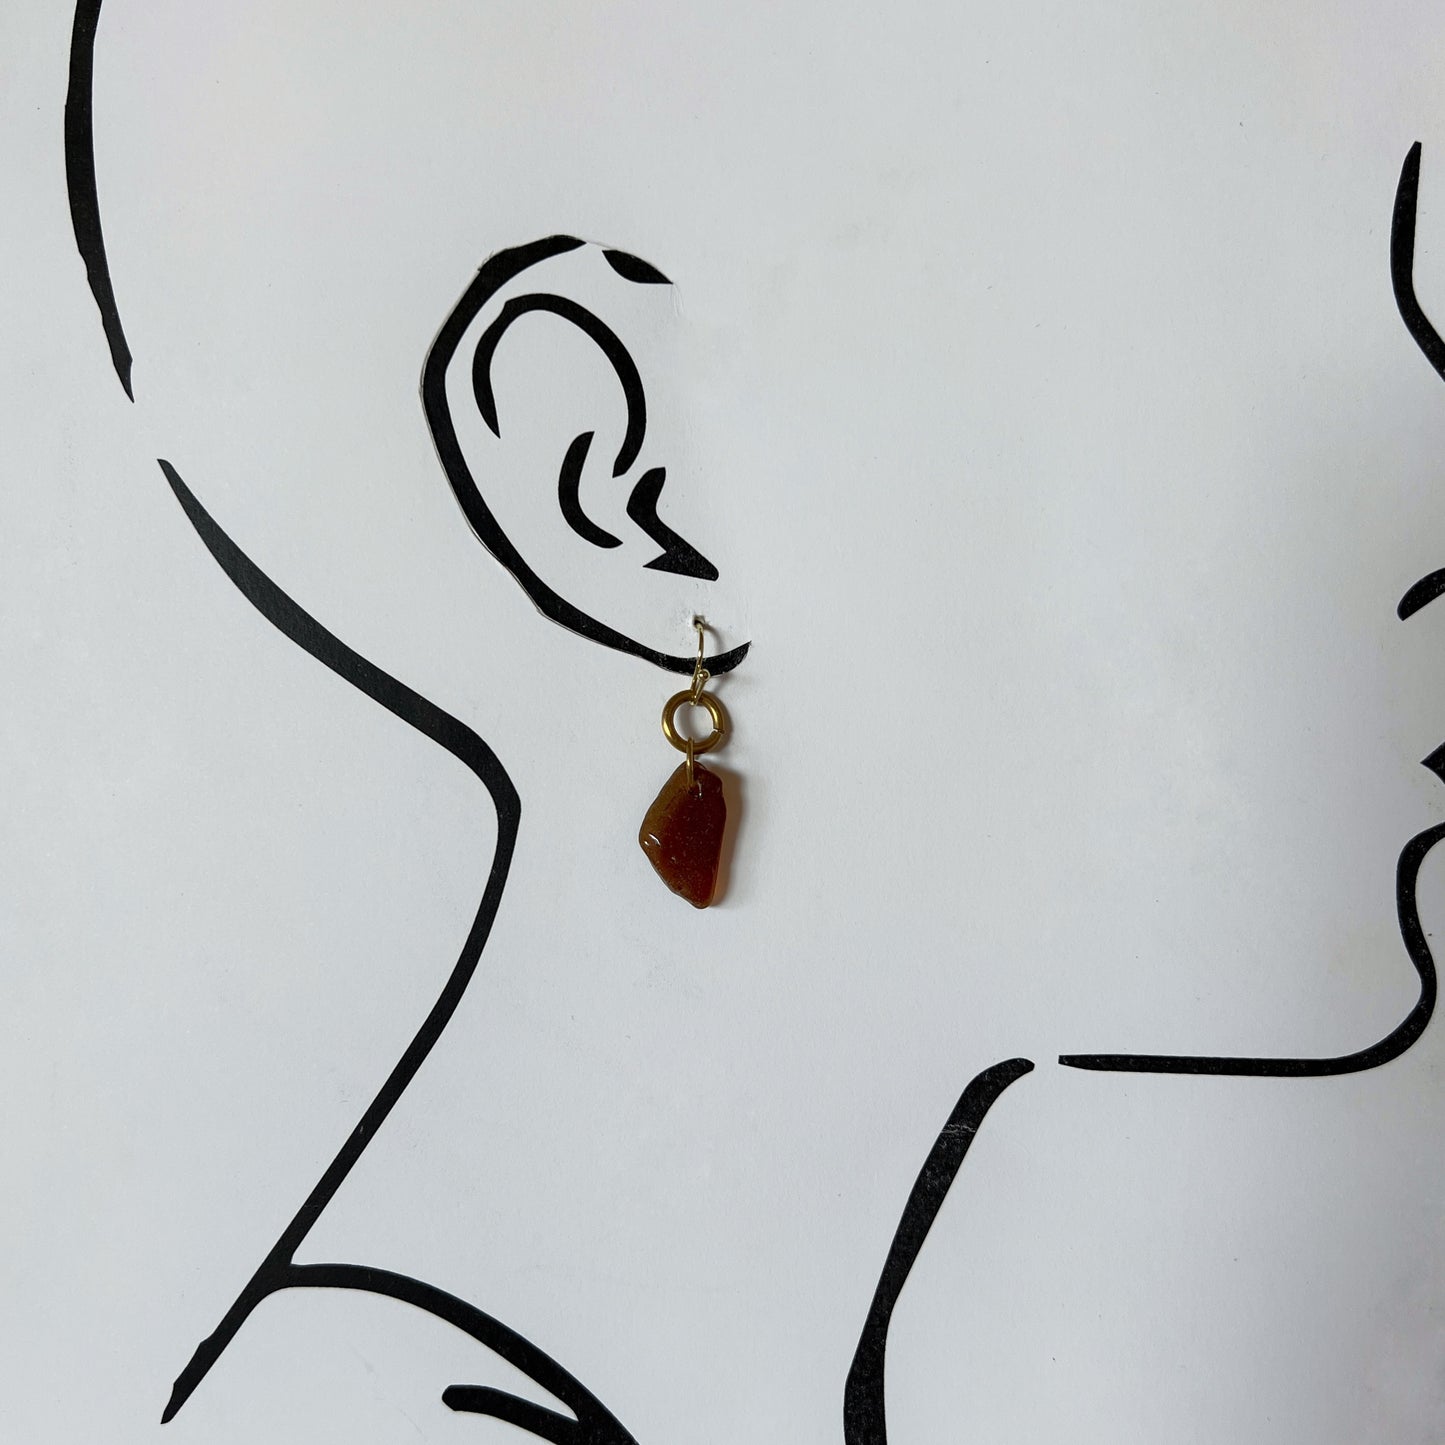 Chique Chicago Beach Glass Earrings (Brown)